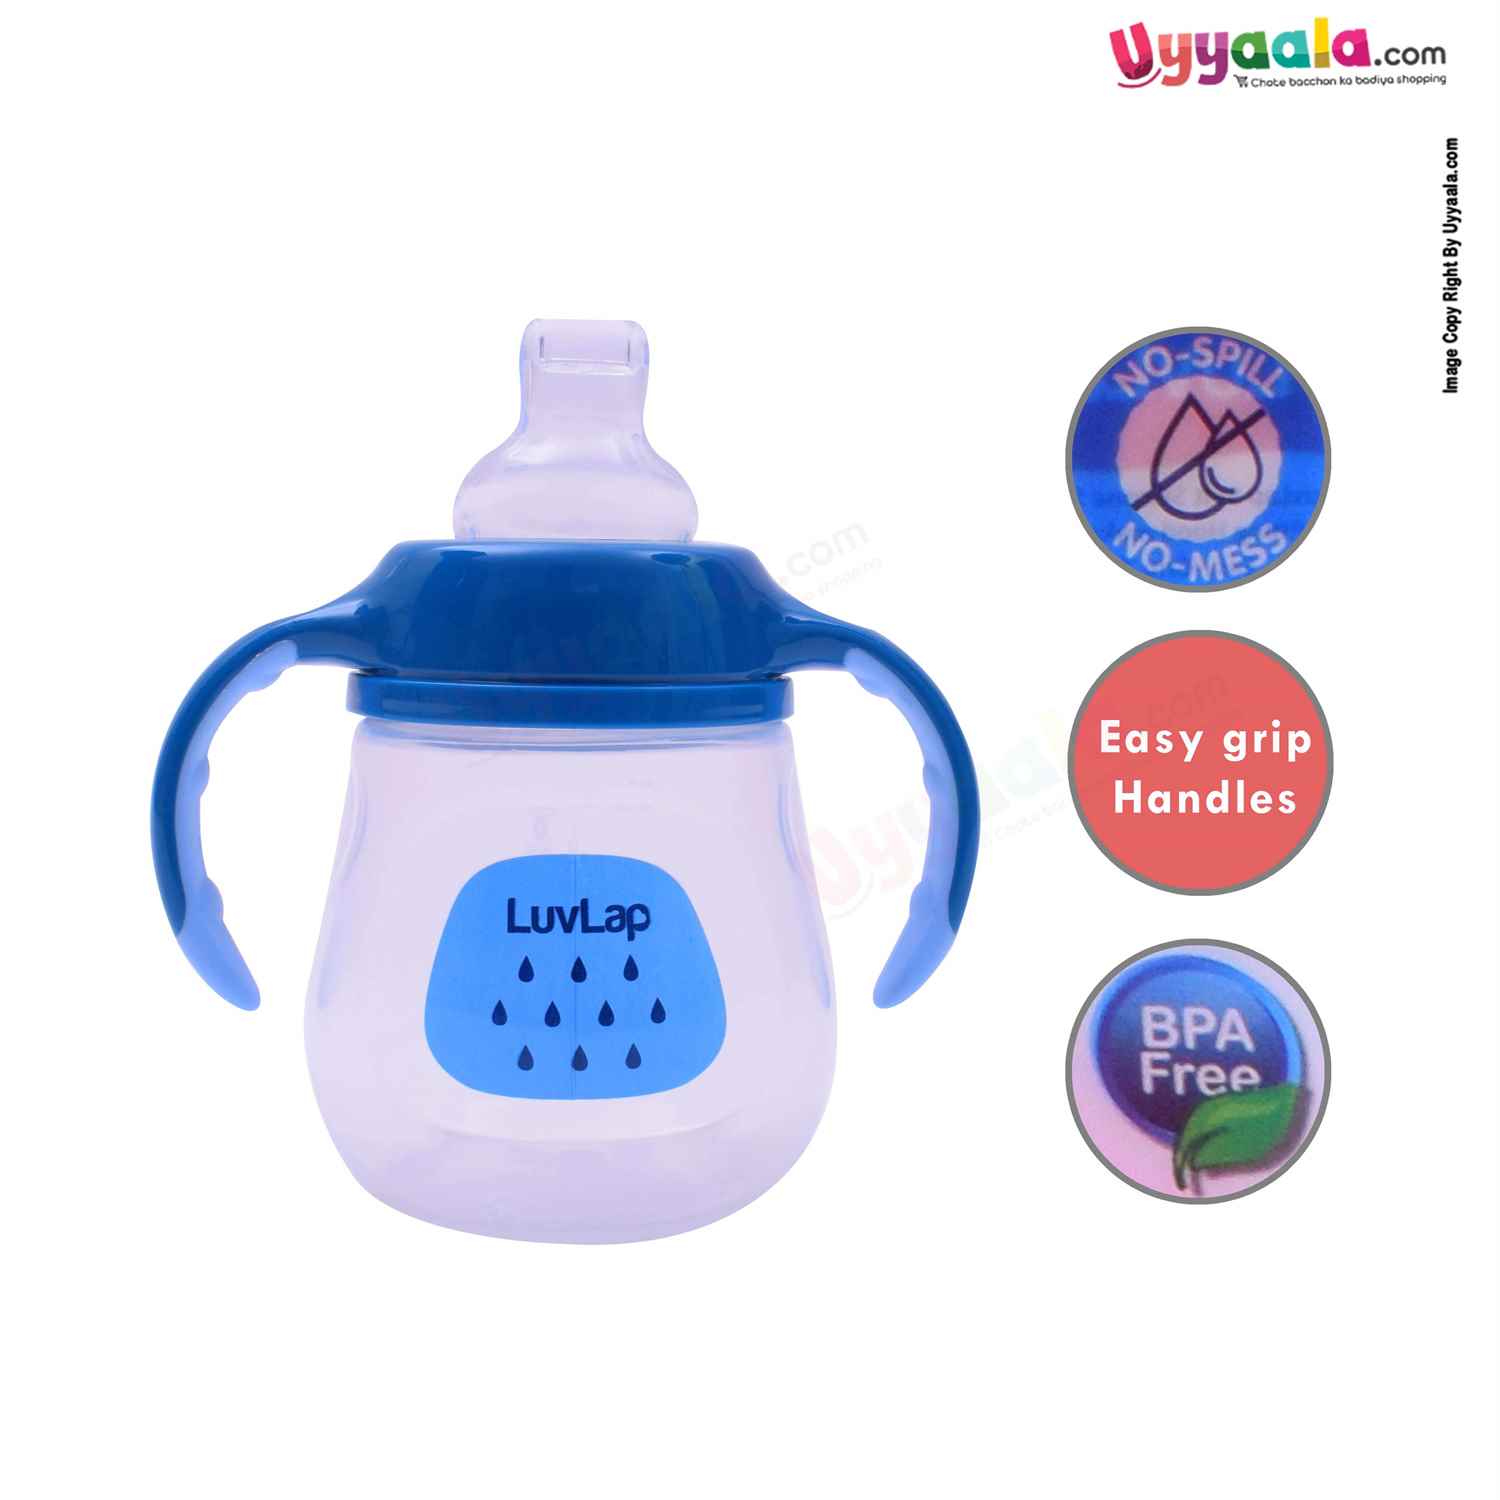 LUVLAP Little Dolphin Spout Sipper Cup with Easy Grip Twin Handle Bottle 210 ml 6+m Age, Blue